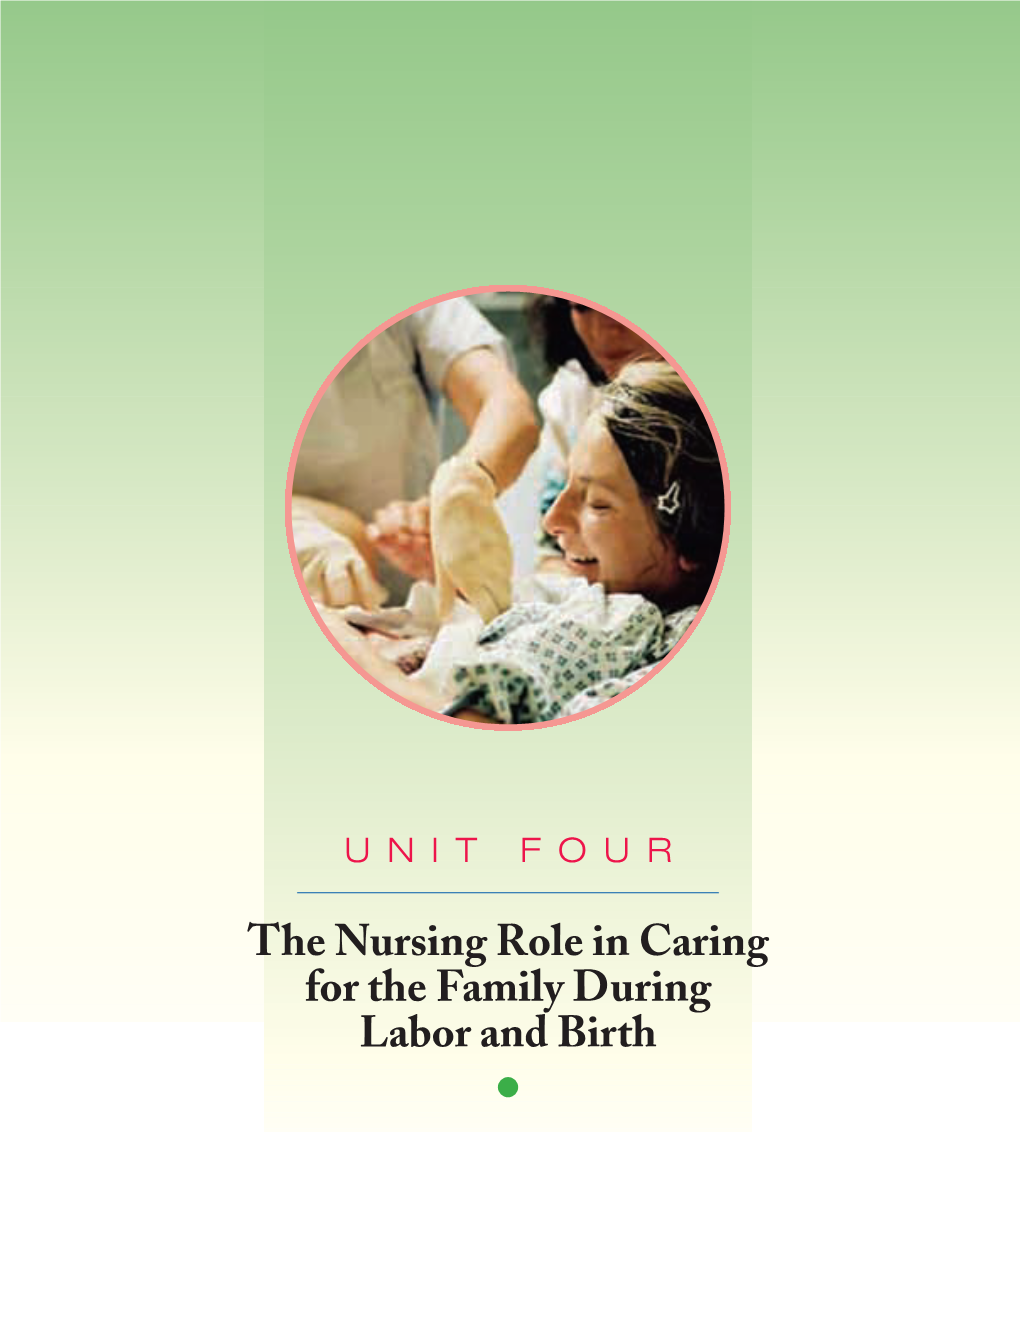 The Nursing Role in Caring for the Family During Labor and Birth